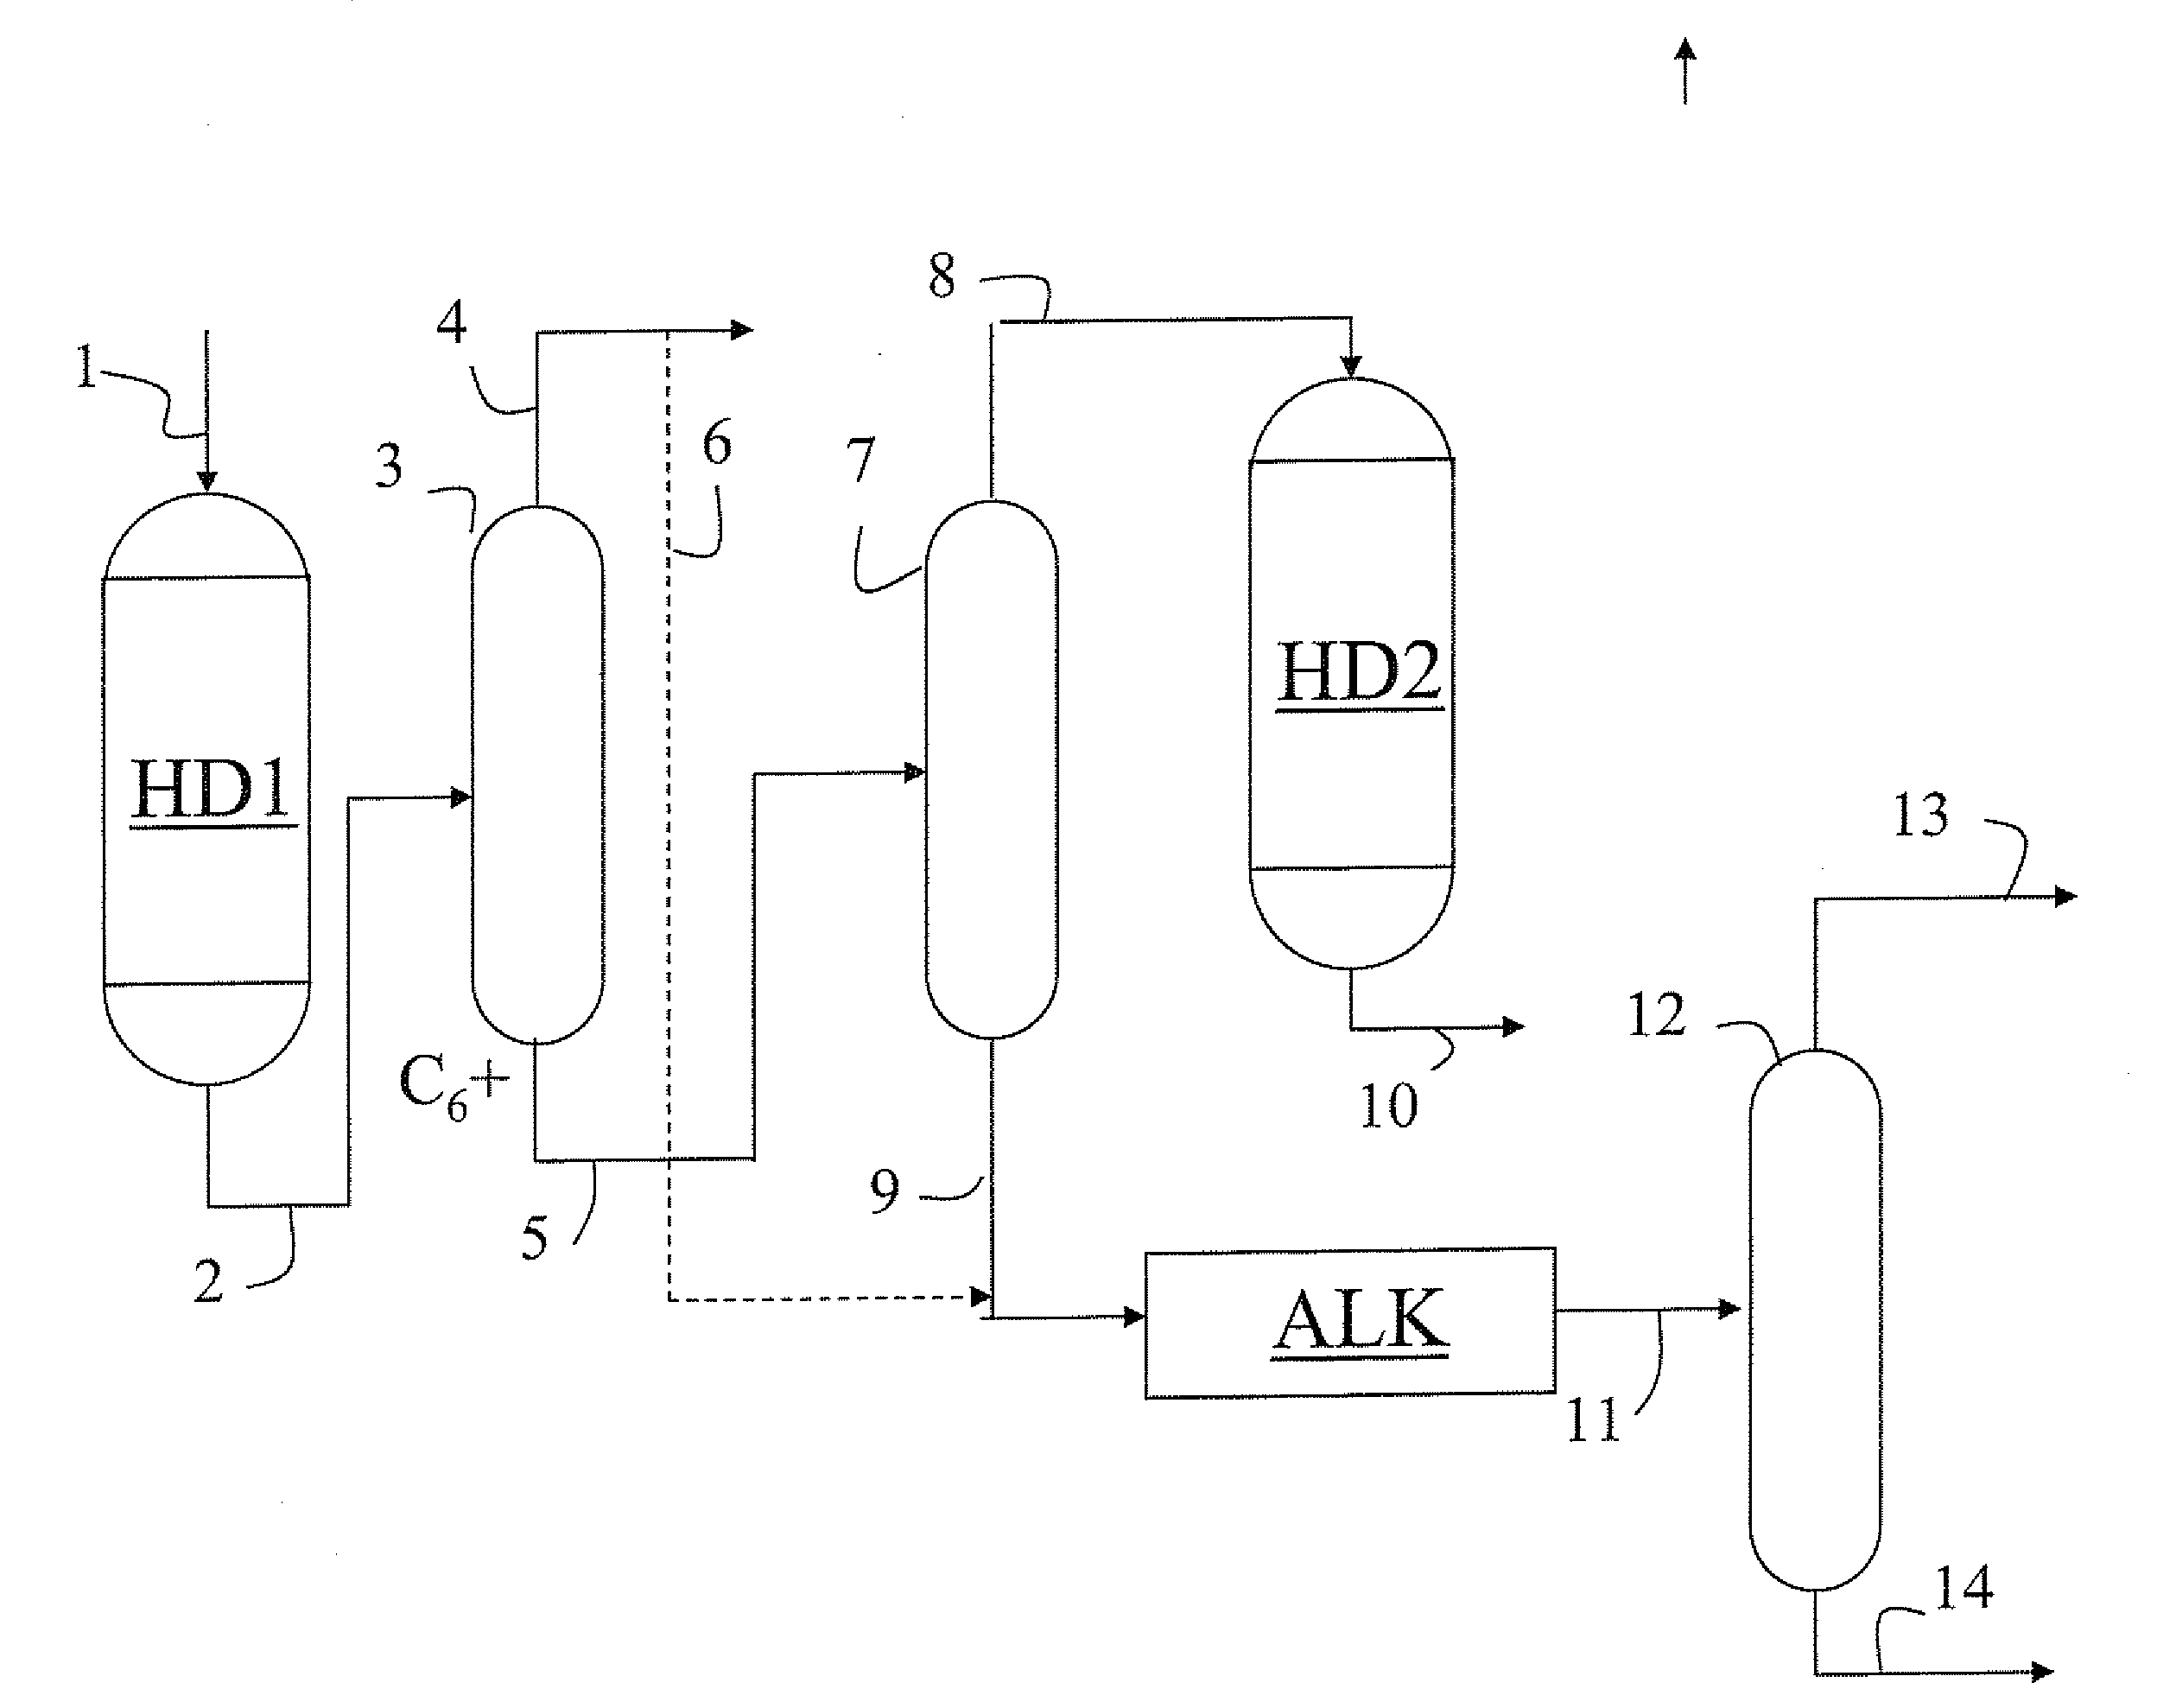 Method for desulfurizing hydrocarbon fractions from steam cracking effluents